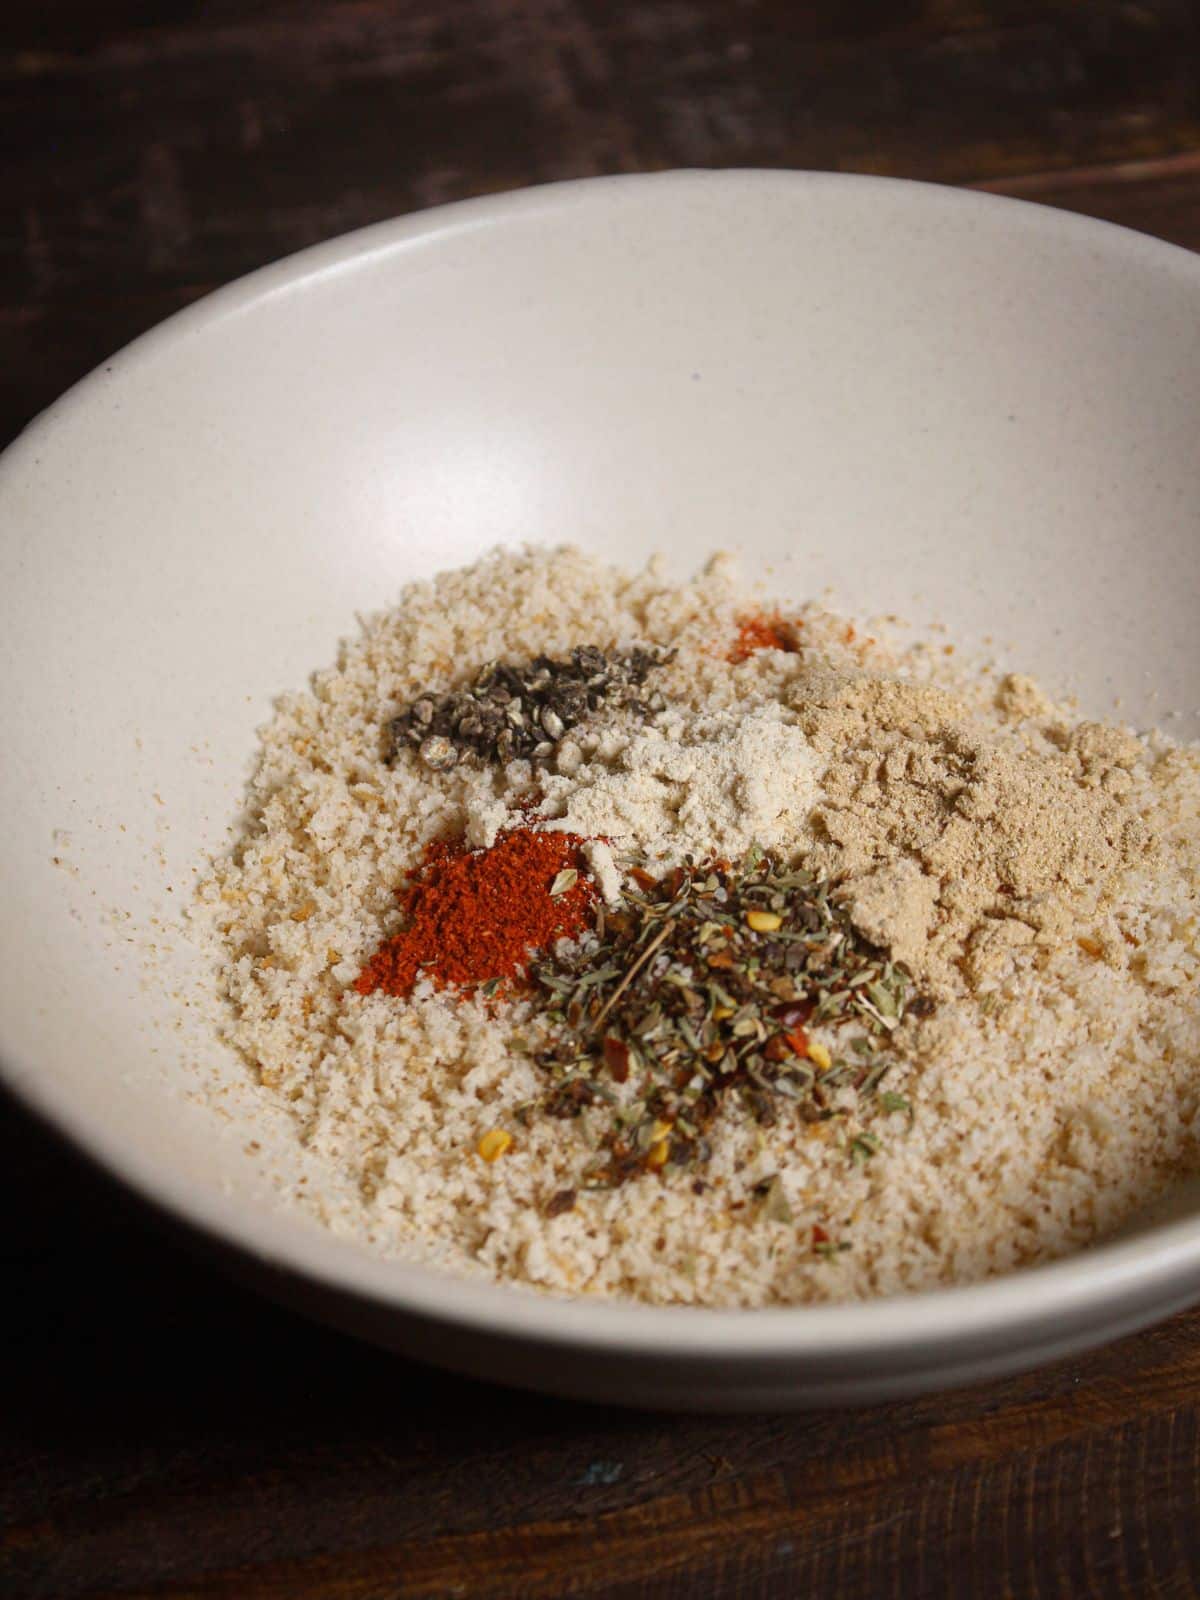 Take bread crumbs along with powdered spices into the bowl 